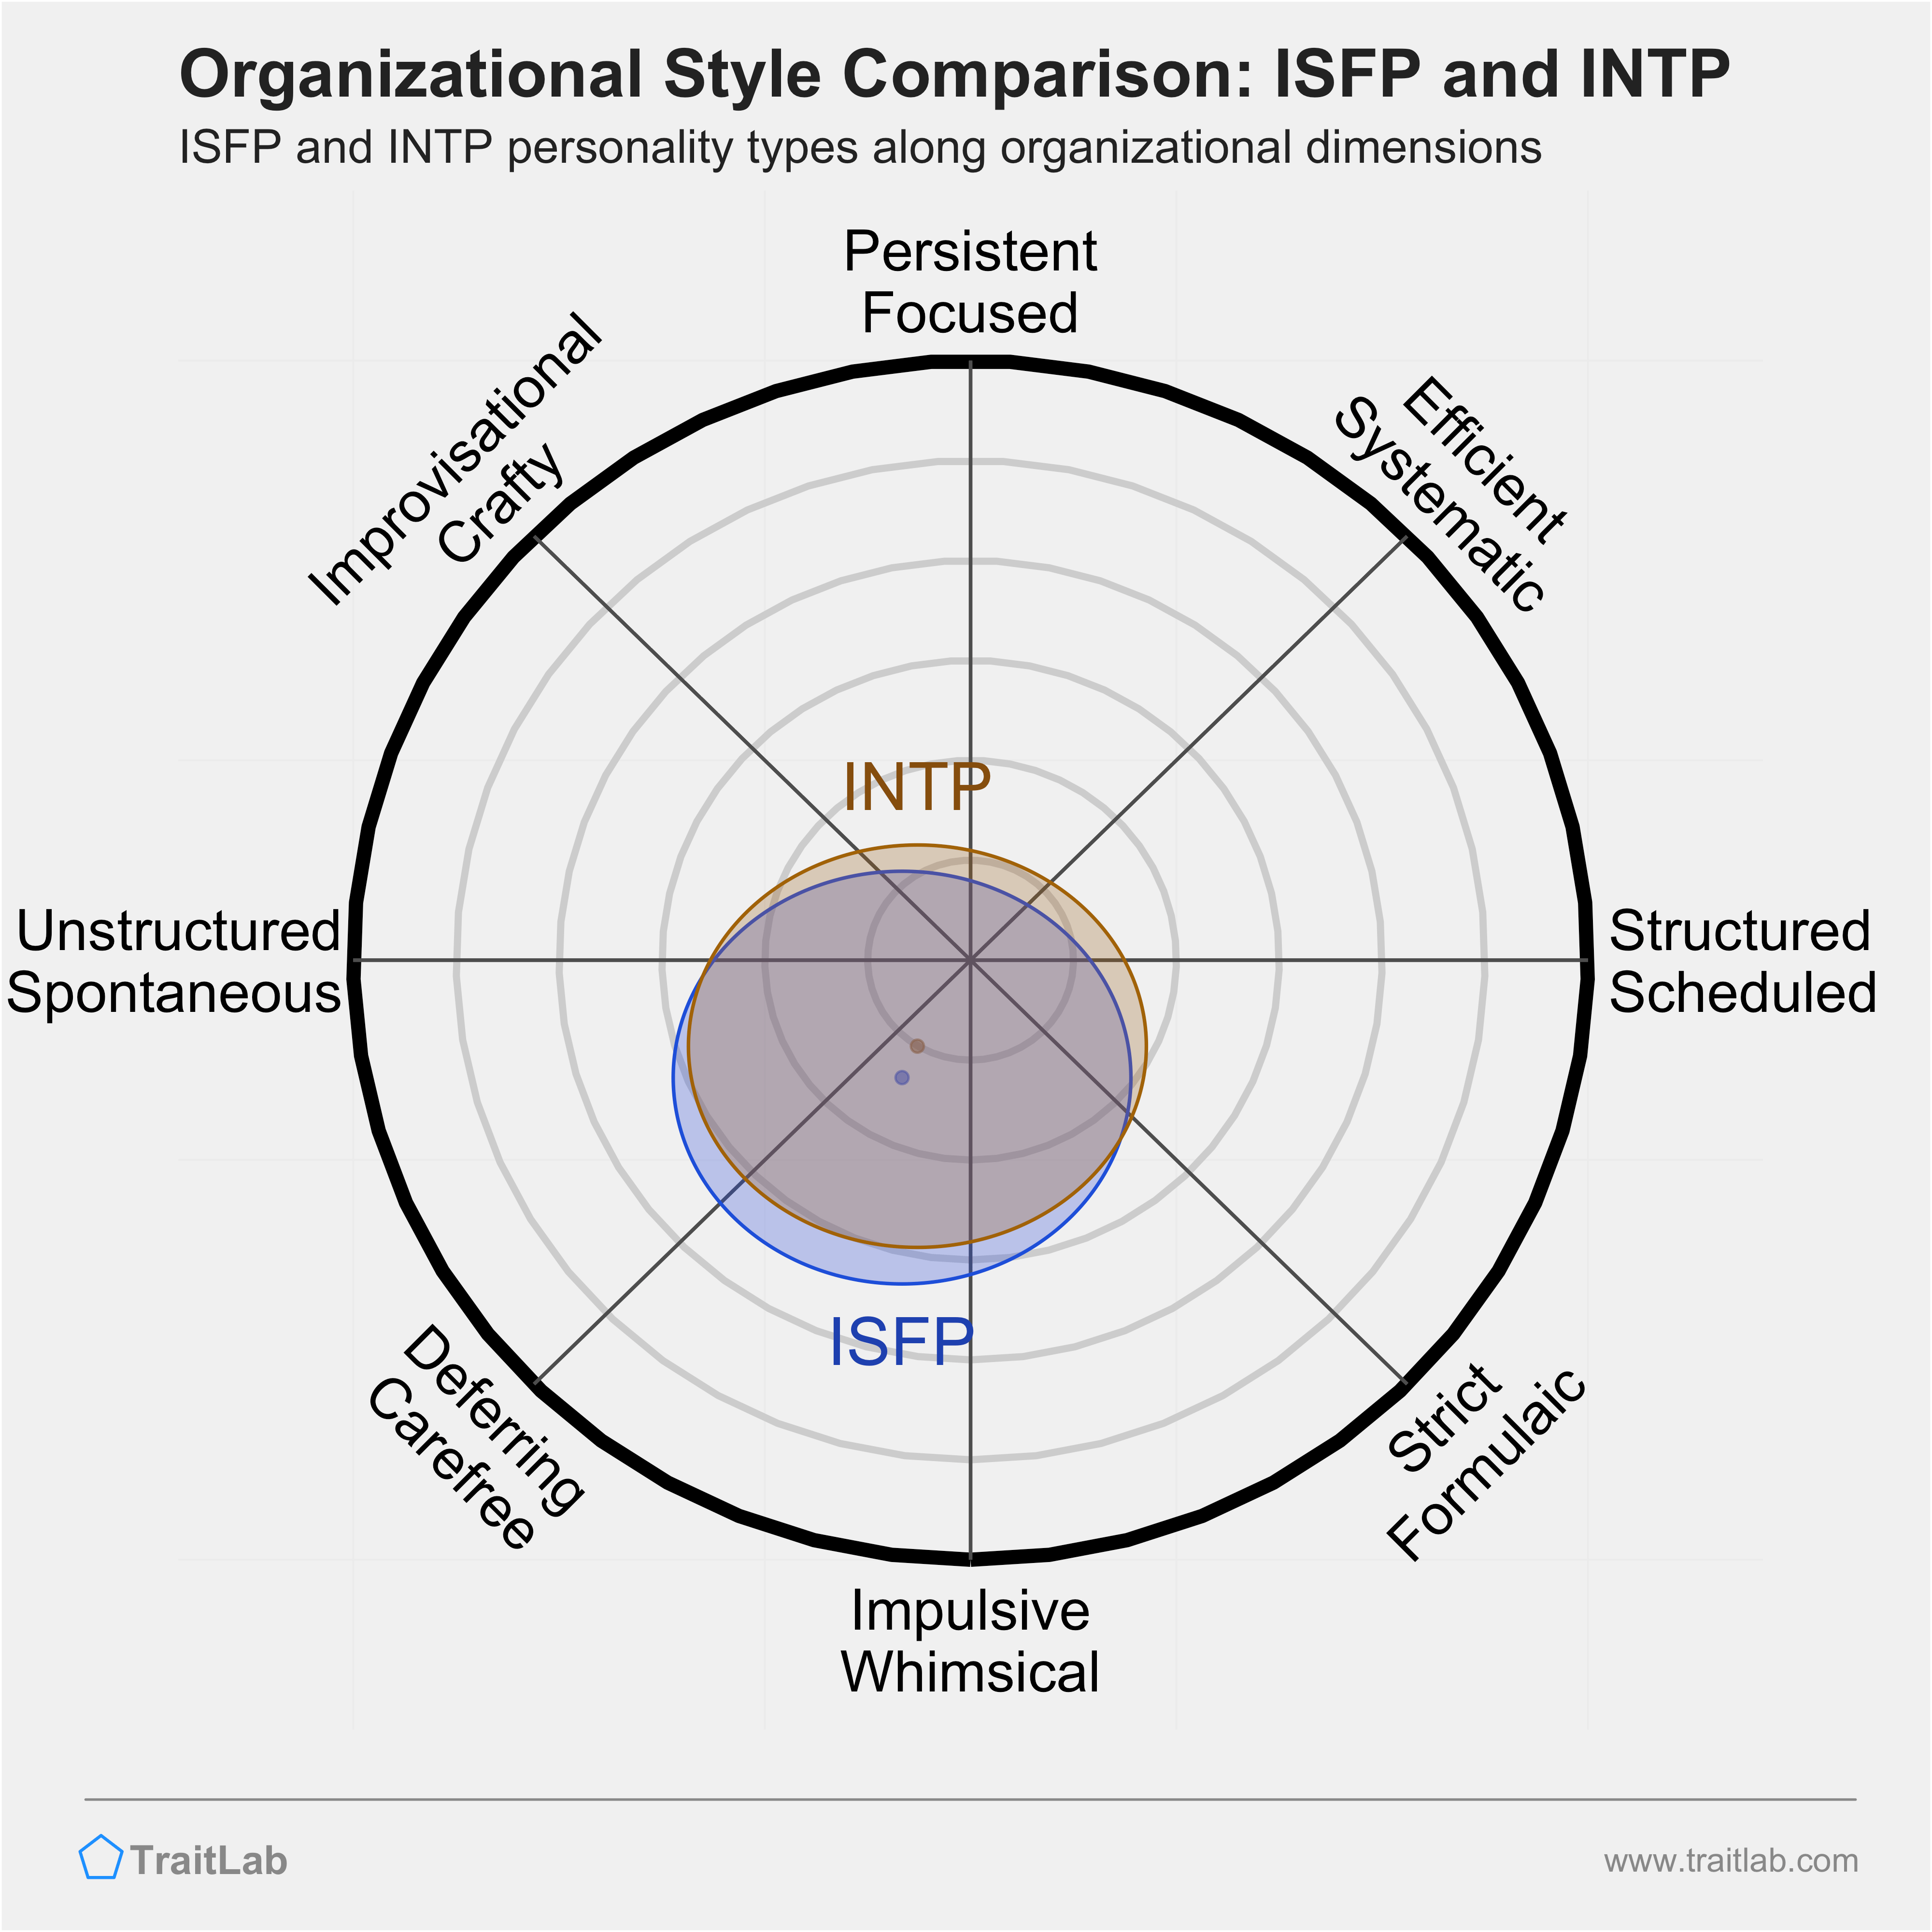 ISFP and INTP comparison across organizational dimensions